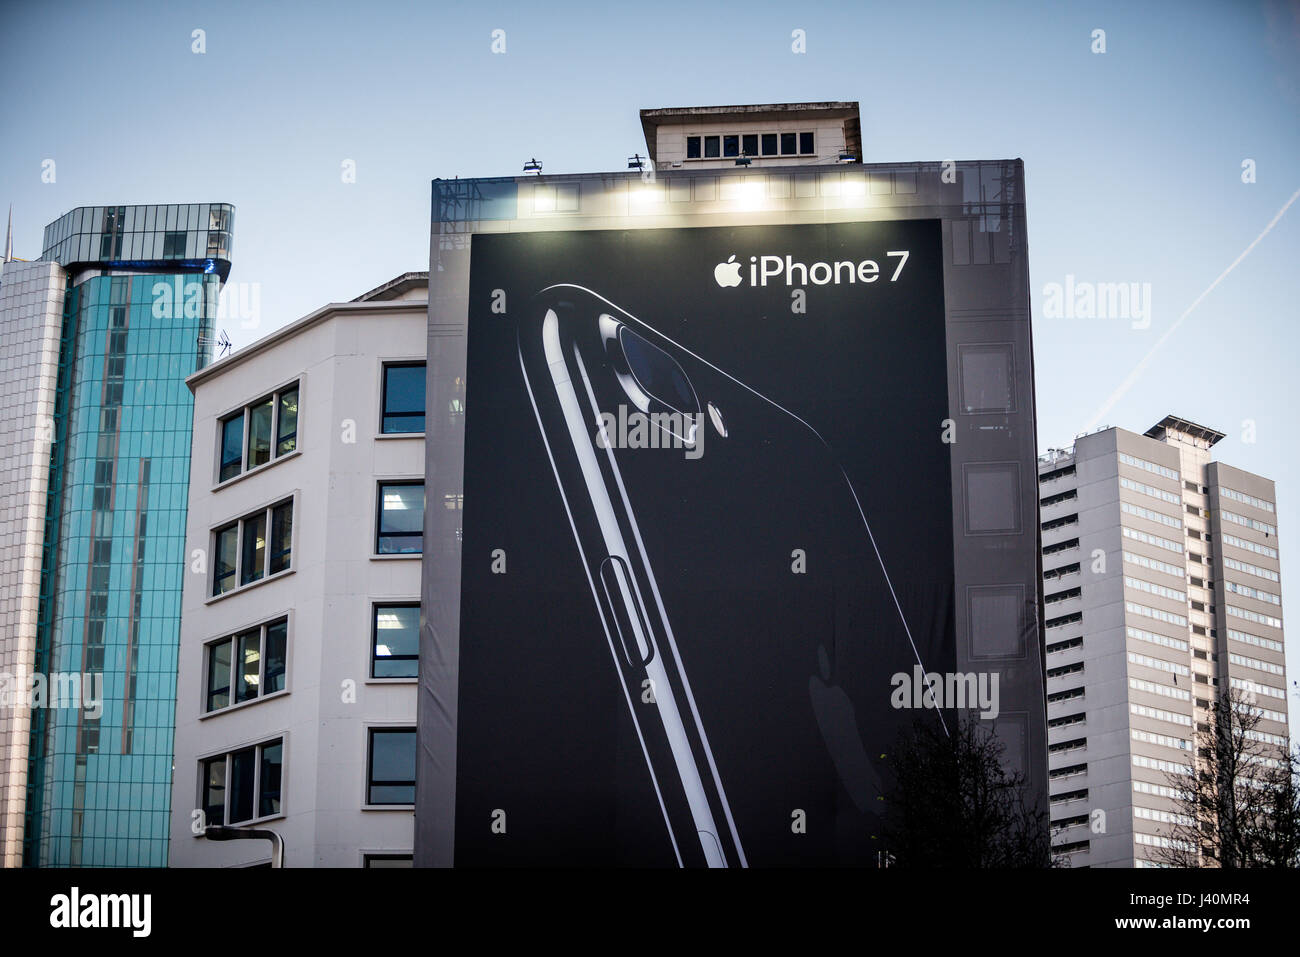 Apple iPhone 7 billboard advertisement and buildings in city centre, UK Stock Photo